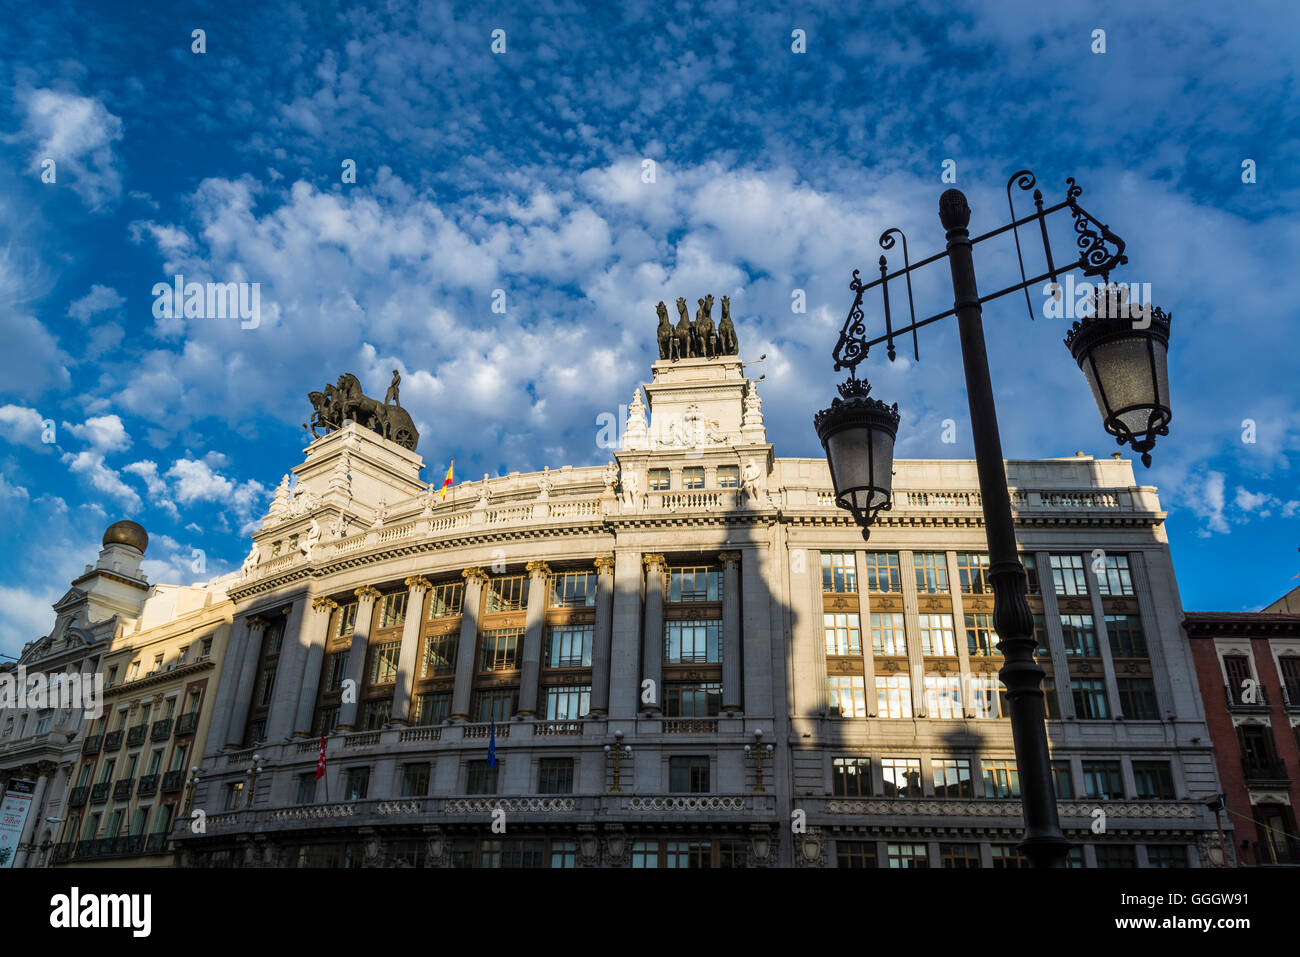 Bilbao bank Building with two Quadriga sculptures on the roof, Madrid, Spain Stock Photo